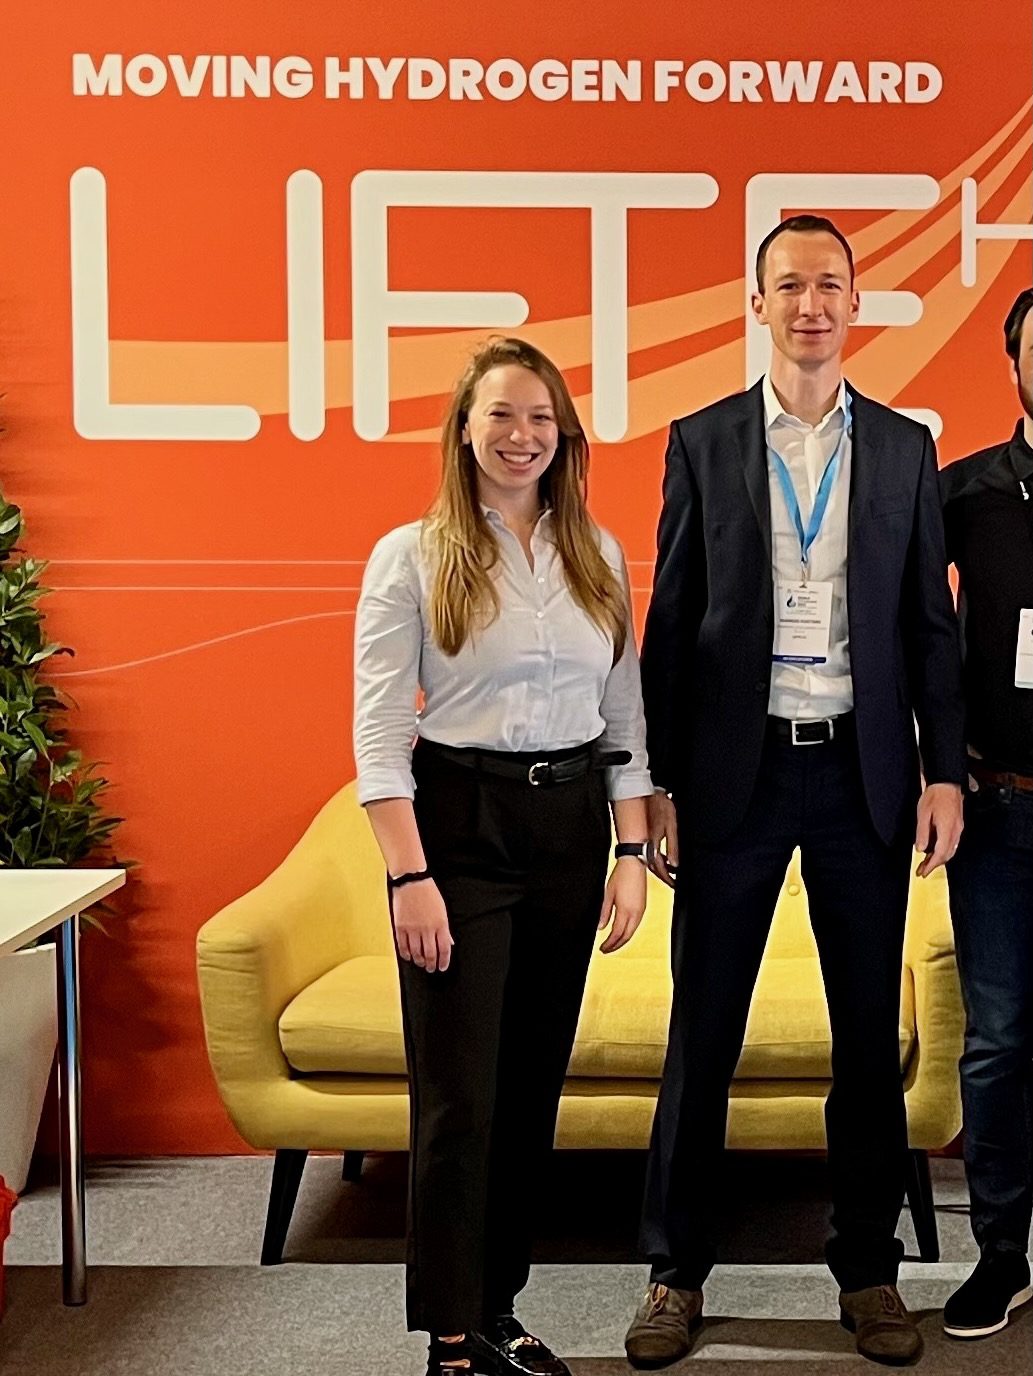 LIFTE team at the conference